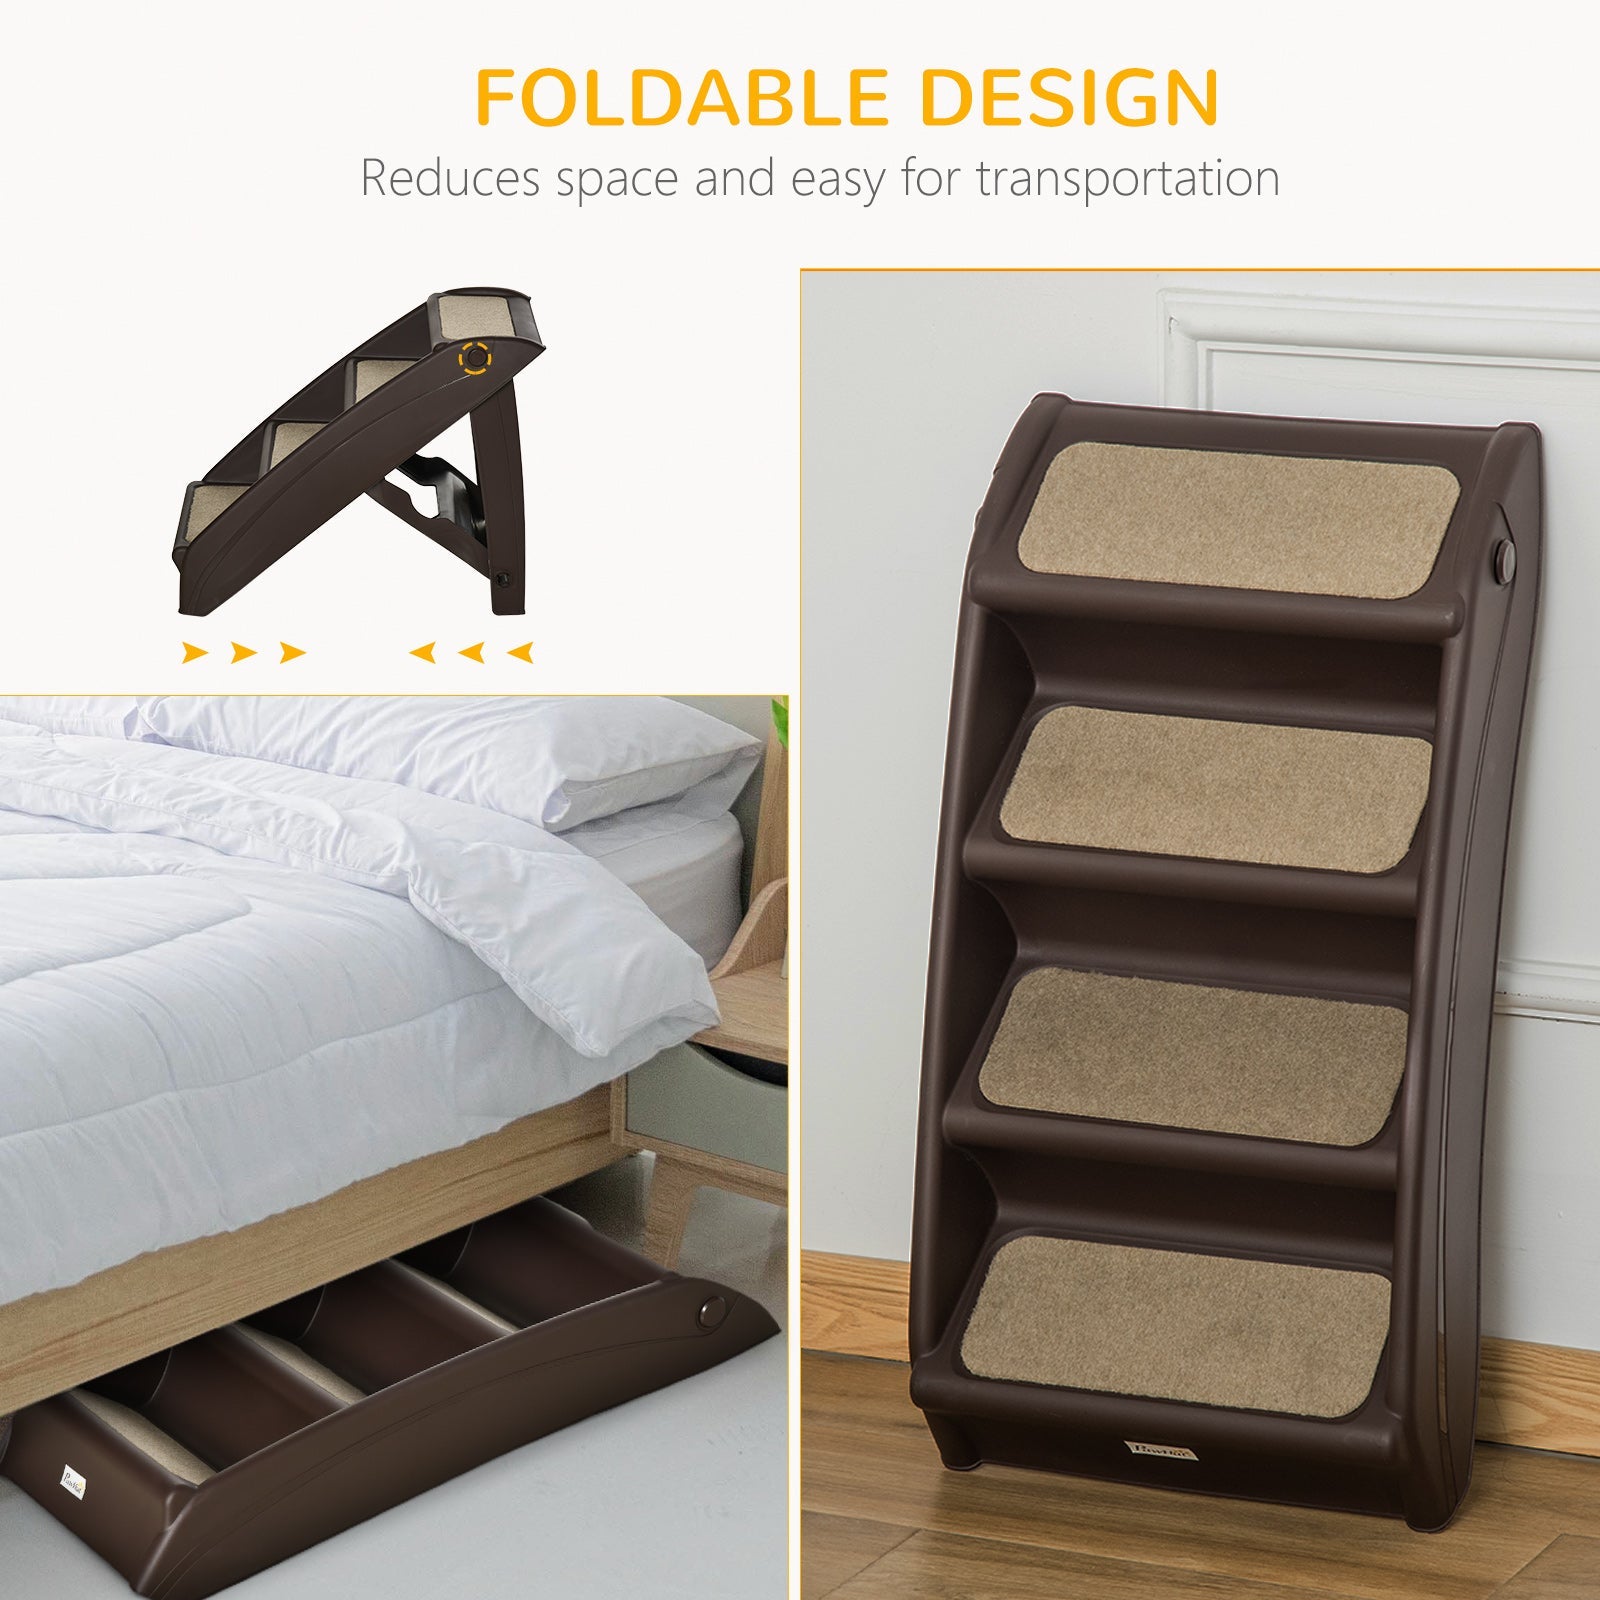 4-Level Portable Pet Stairs, Foldable Dog Ramp, Lightweight Cat Steps, with Nonslip Soft Mats, for High Bed, Sofa, Up to 44 lbs, Dark Brown at Gallery Canada